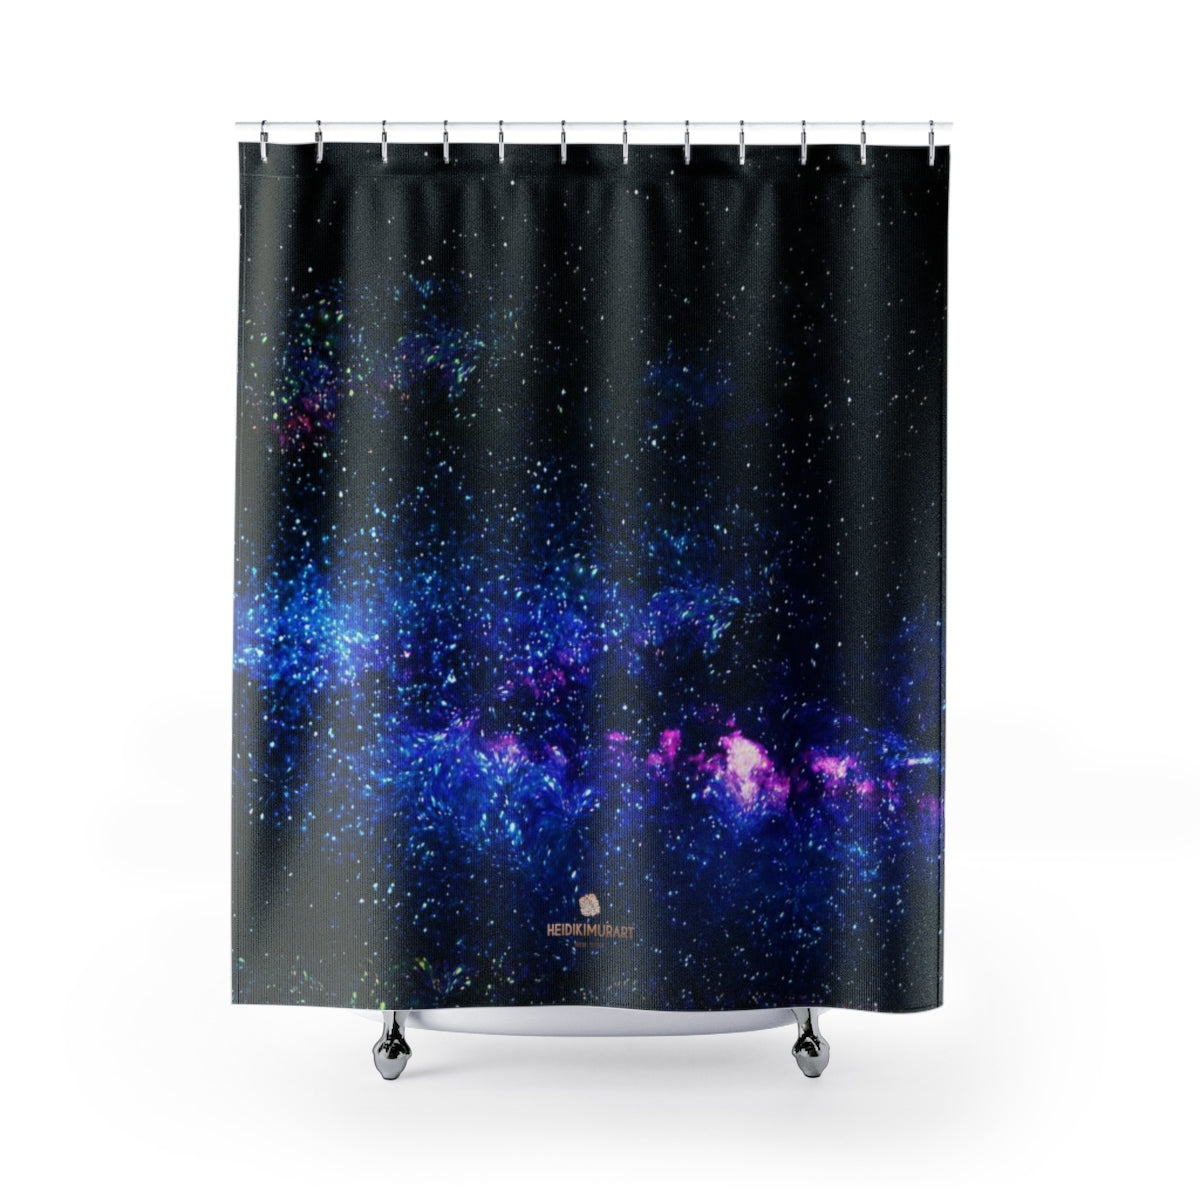 Dark Mysterious Galaxy Universe Designer Large Shower Curtains- Printed in USA-Shower Curtain-71" x 74"-Heidi Kimura Art LLC Dark Galaxy Shower Curtains, Dark Mysterious Galaxy Universe Print Designer Polyester Large 100% 71x74 inches Shower Curtains- Printed in USA